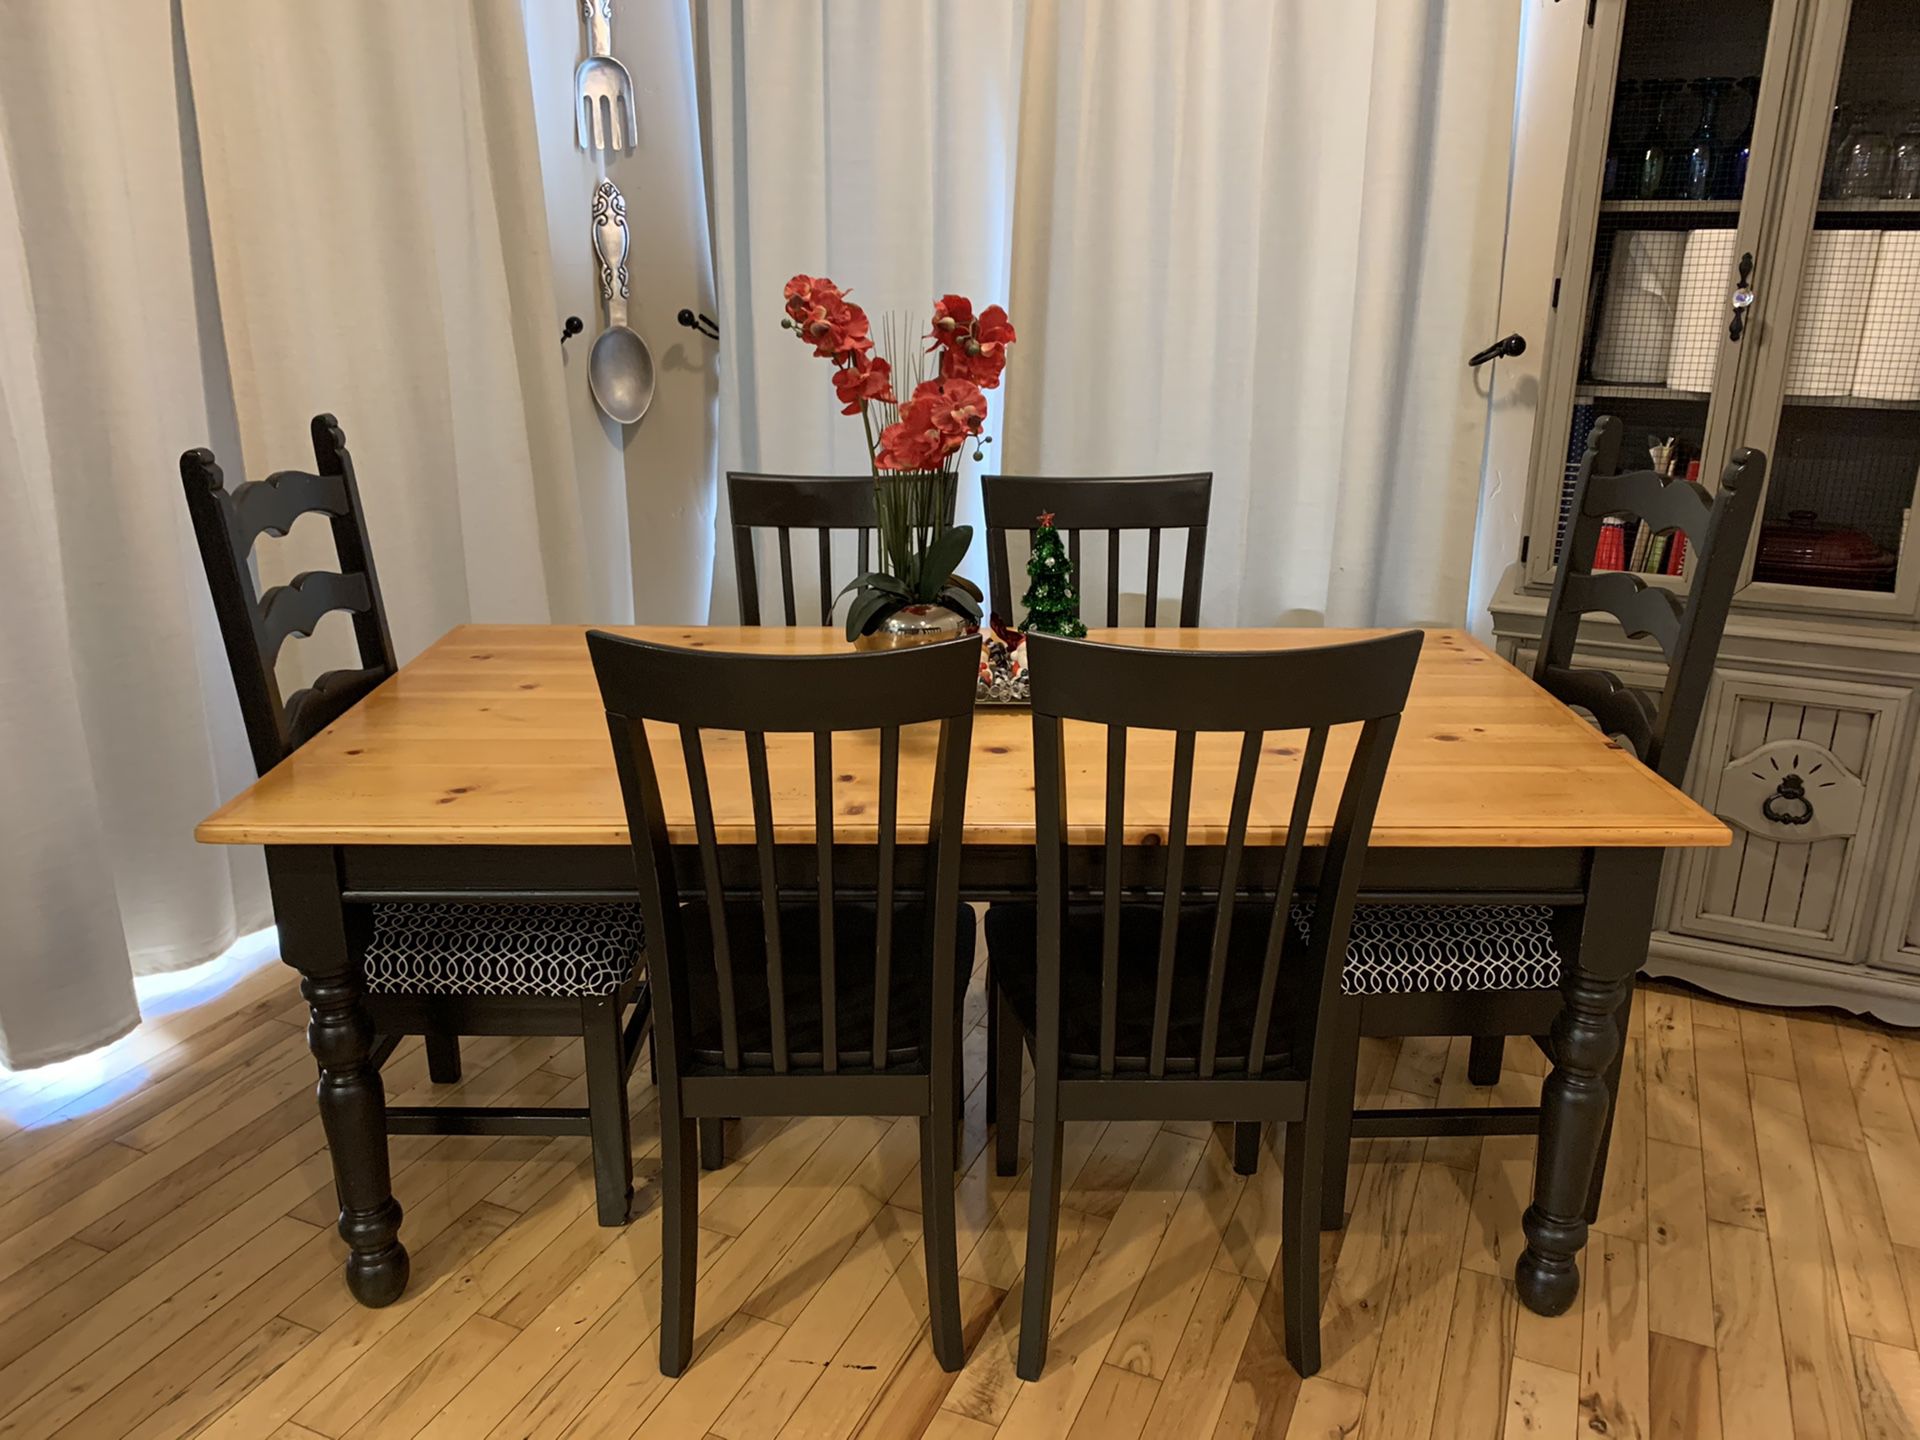 Kitchen Table and Chairs, Dining Room Table and Chairs